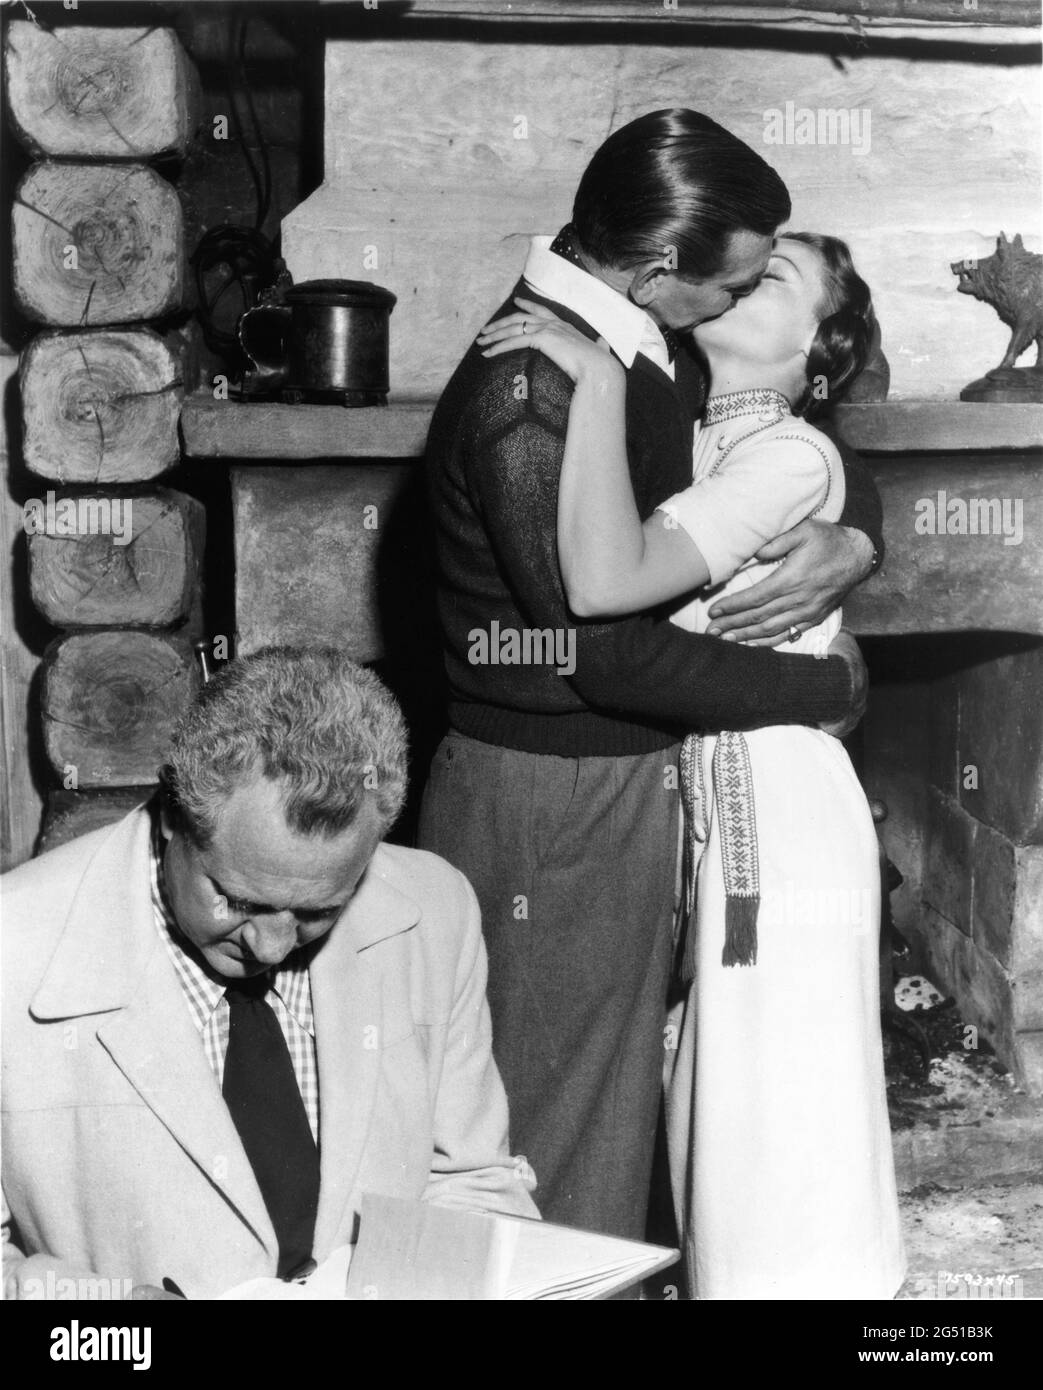 Director DELMER DAVES checks his script while CLARK GABLE and GENE TIERNEY rehearse a love scene on set candid during filming of NEVER LET ME GO 1953 director DELMER DAVES from novel Come The Dawn by Paul Winterton producer Clarence Brown Metro Goldwyn Mayer Stock Photo